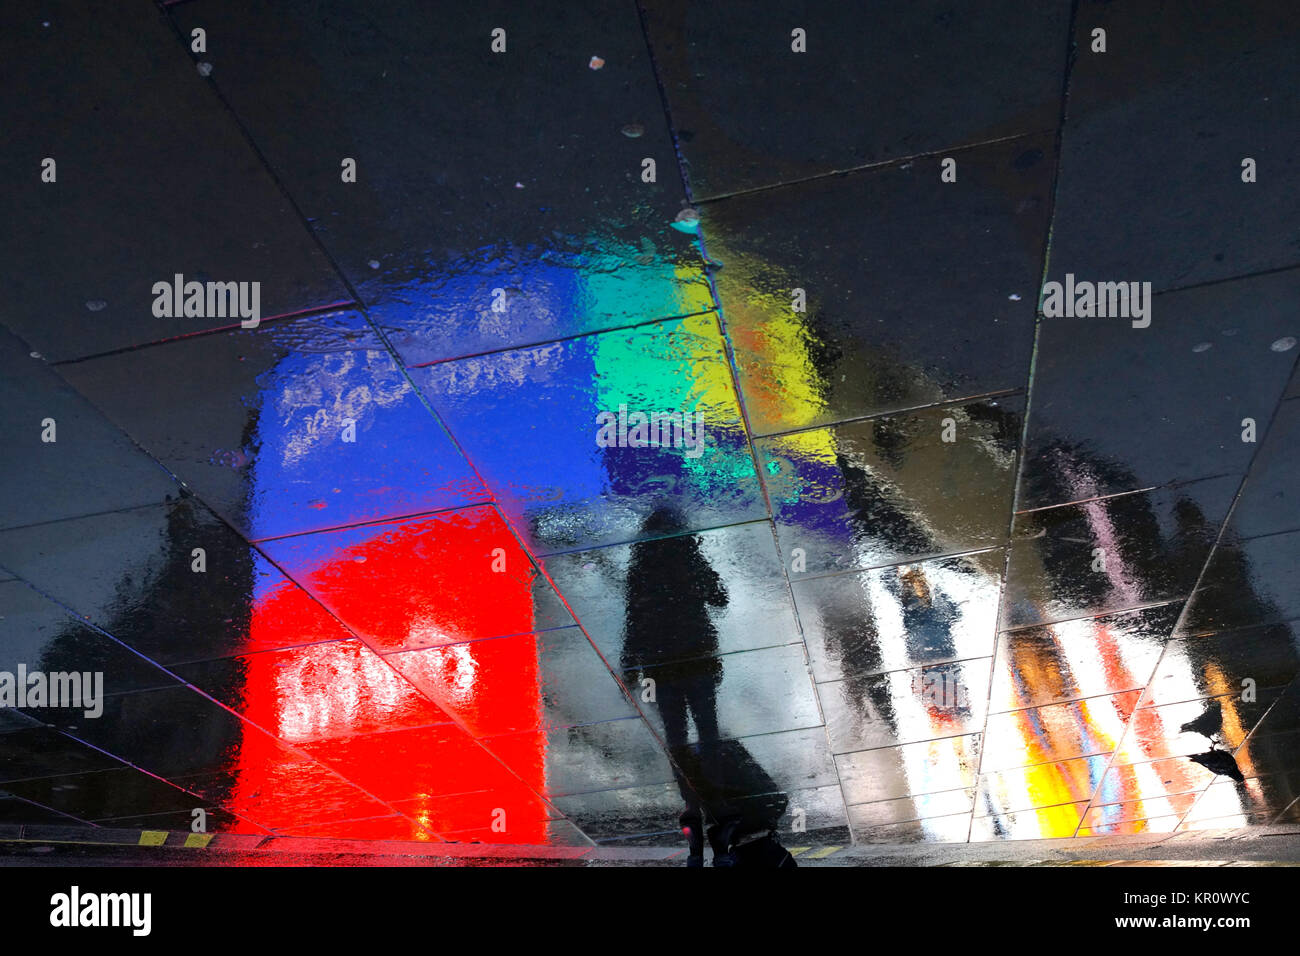 Woman with suitcase photographing the night lights at Piccadilly Circus, London (reflection on a rainy day) Stock Photo